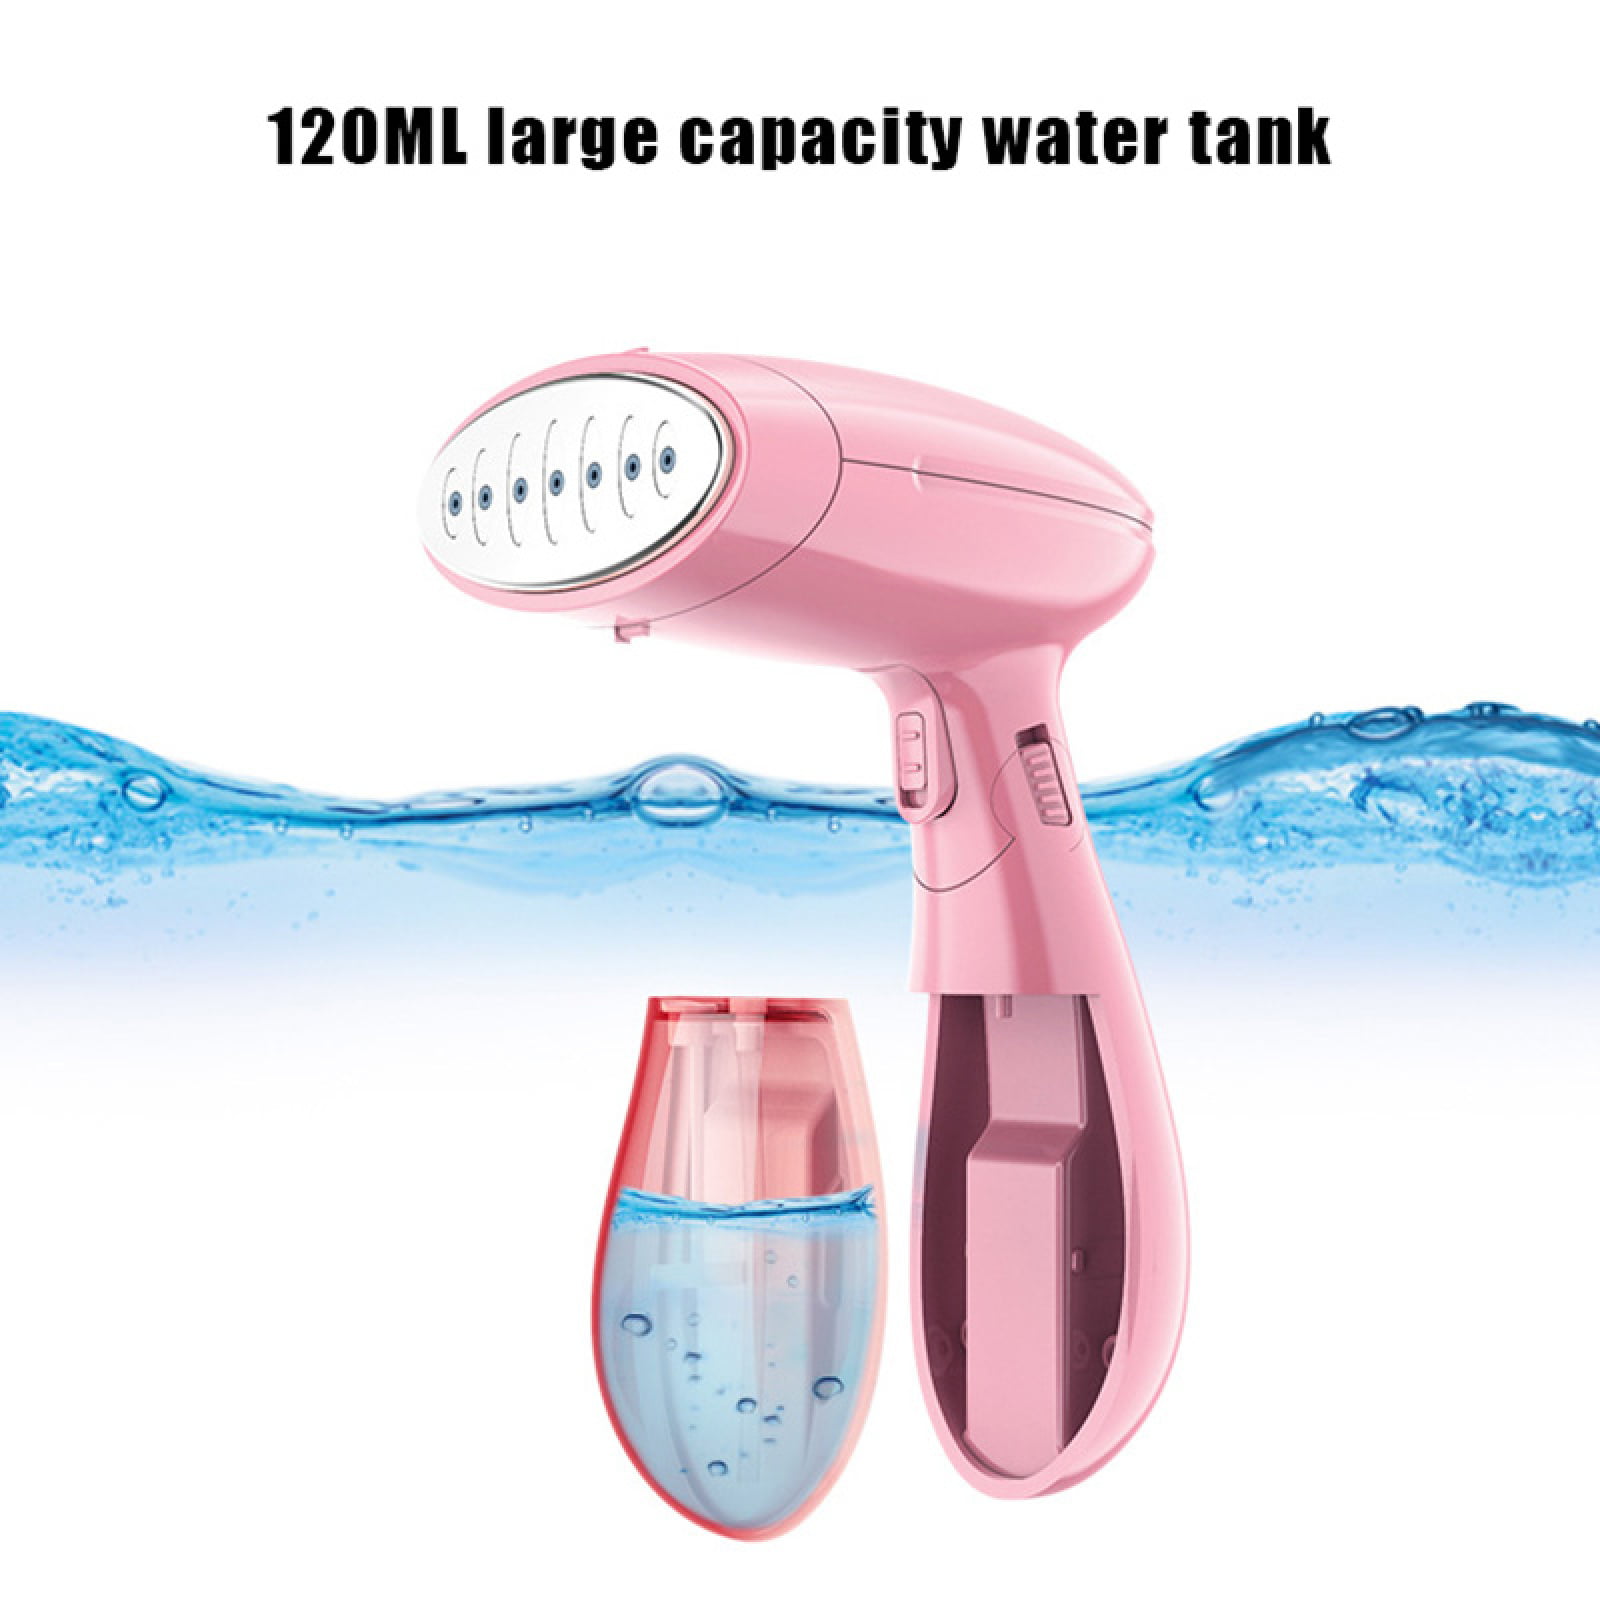 1300W 220V Portable Steamer Fabric Clothes Garment Steam Iron Handheld Compact